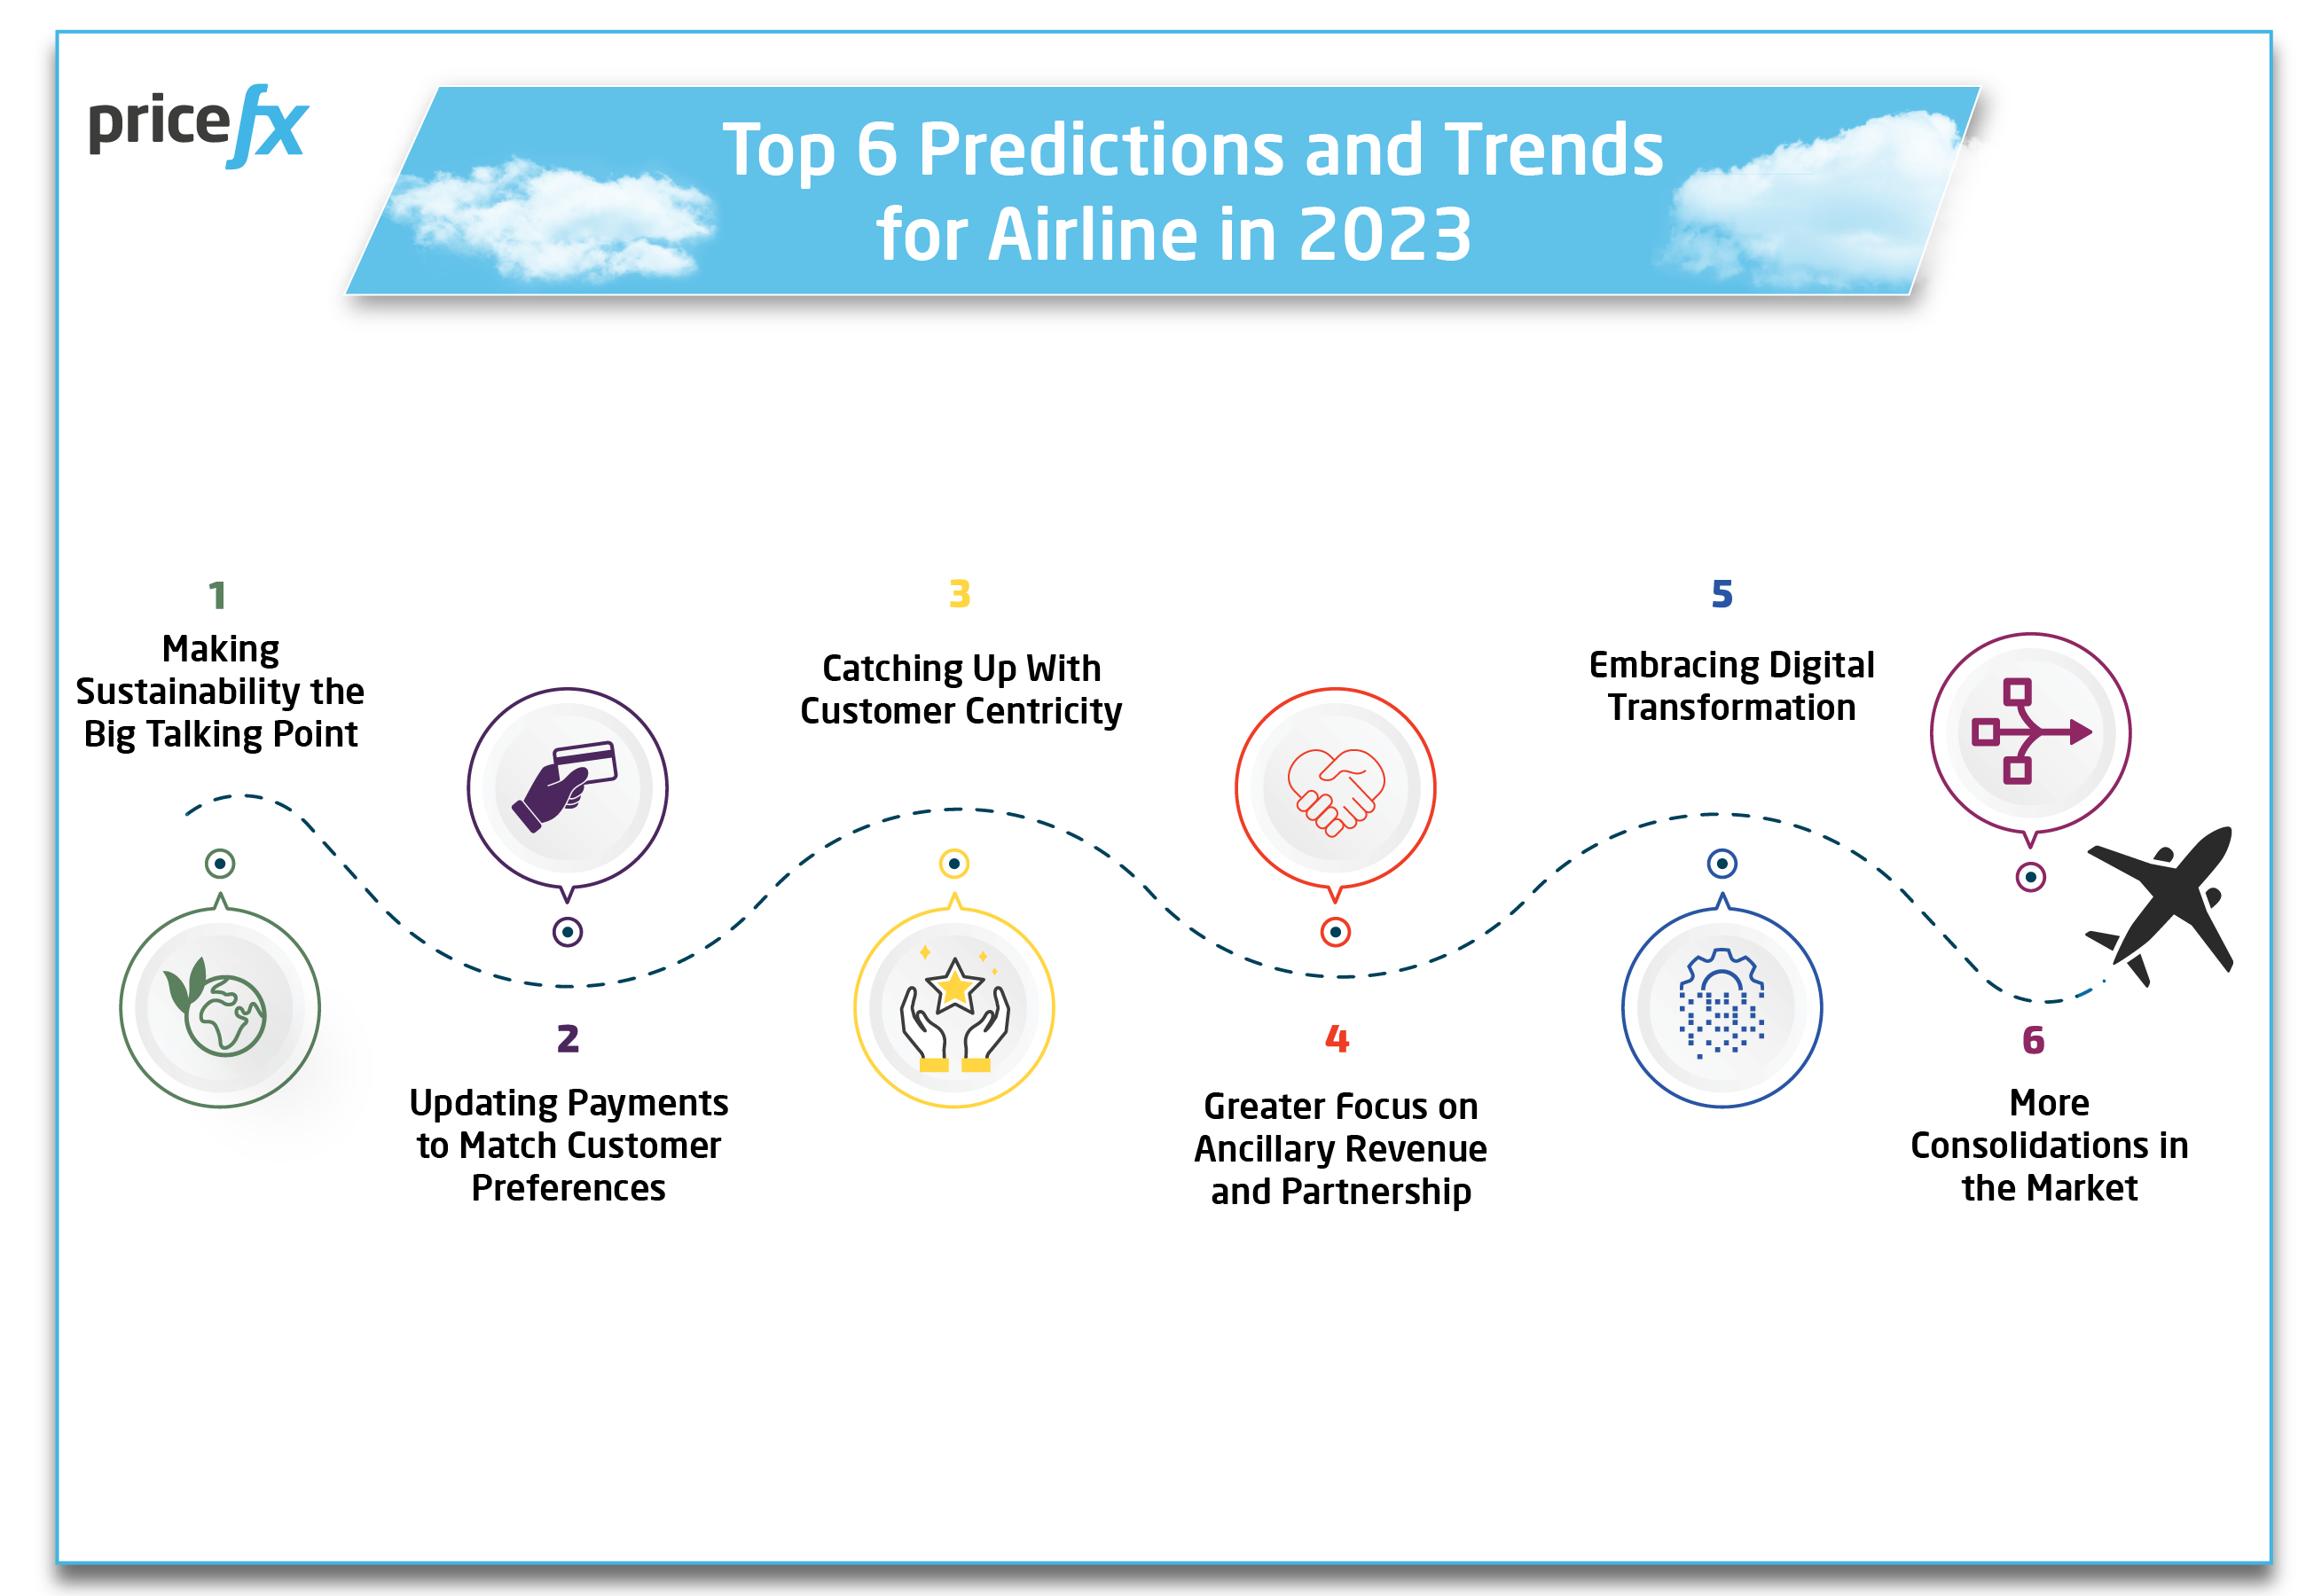 Image_Airline-top-6-prediction-and-trends-for-airline-in-2023